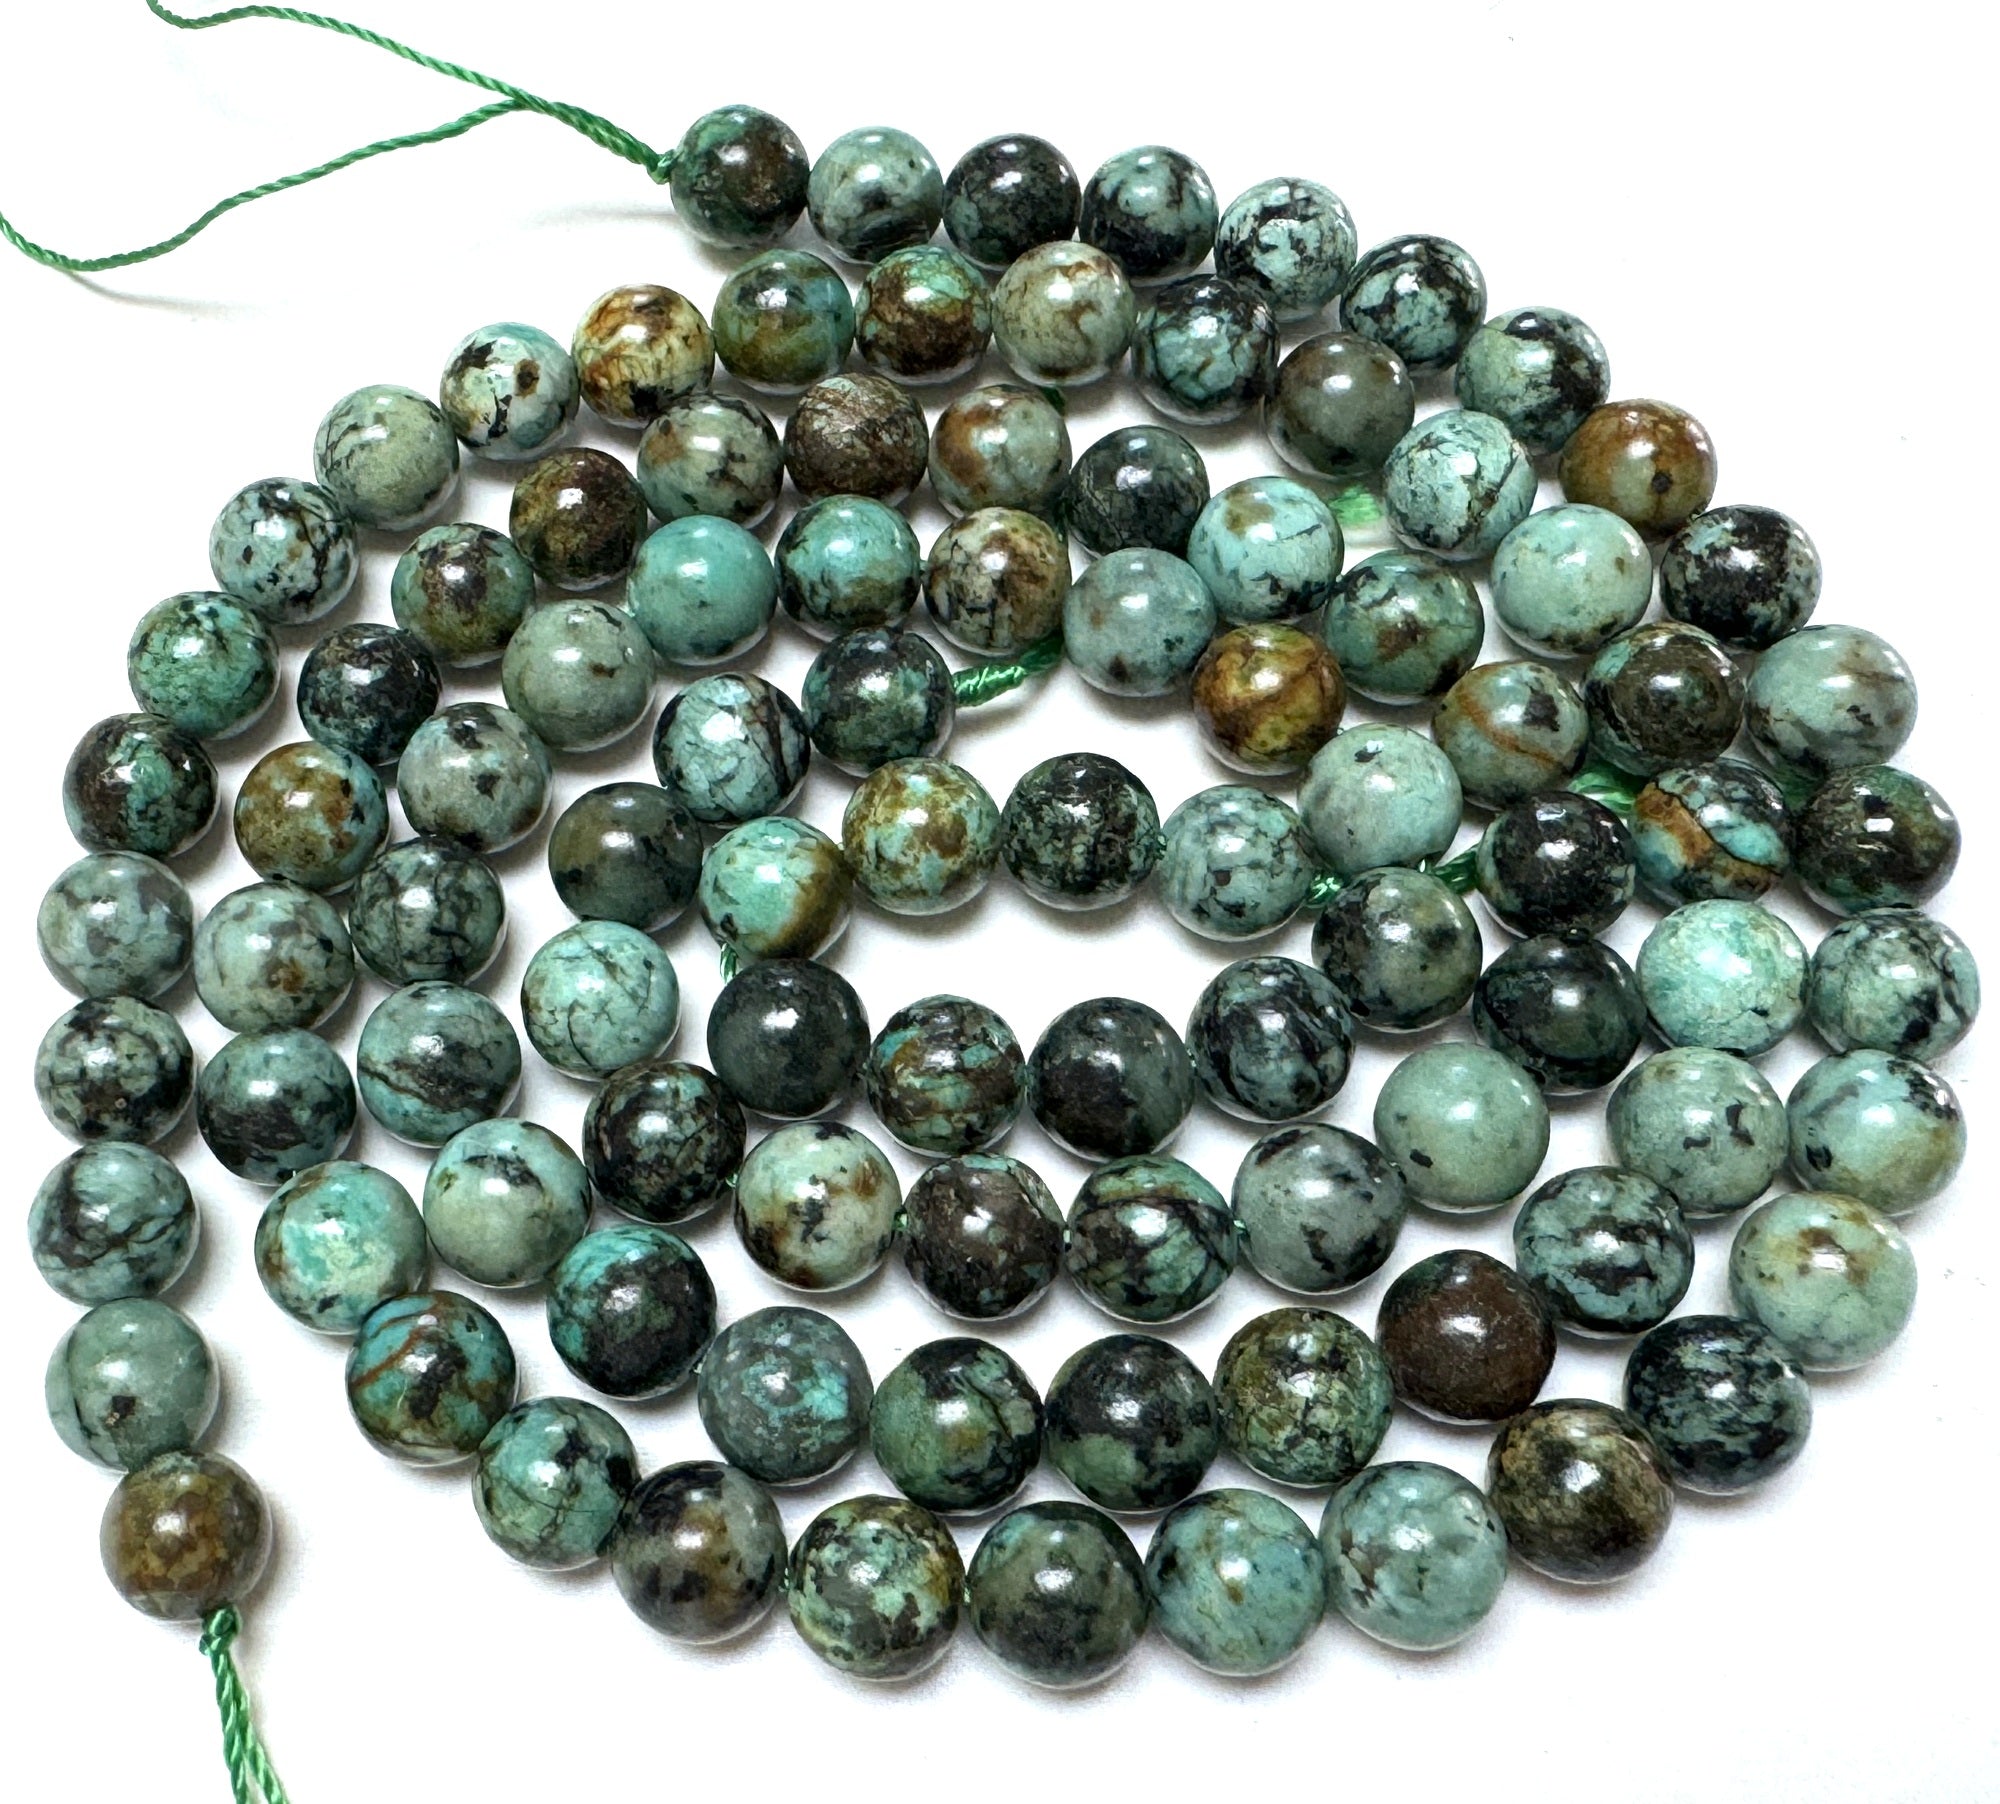 African Turquoise 8mm round natural gemstone beads 15.5" strand - Oz Beads 